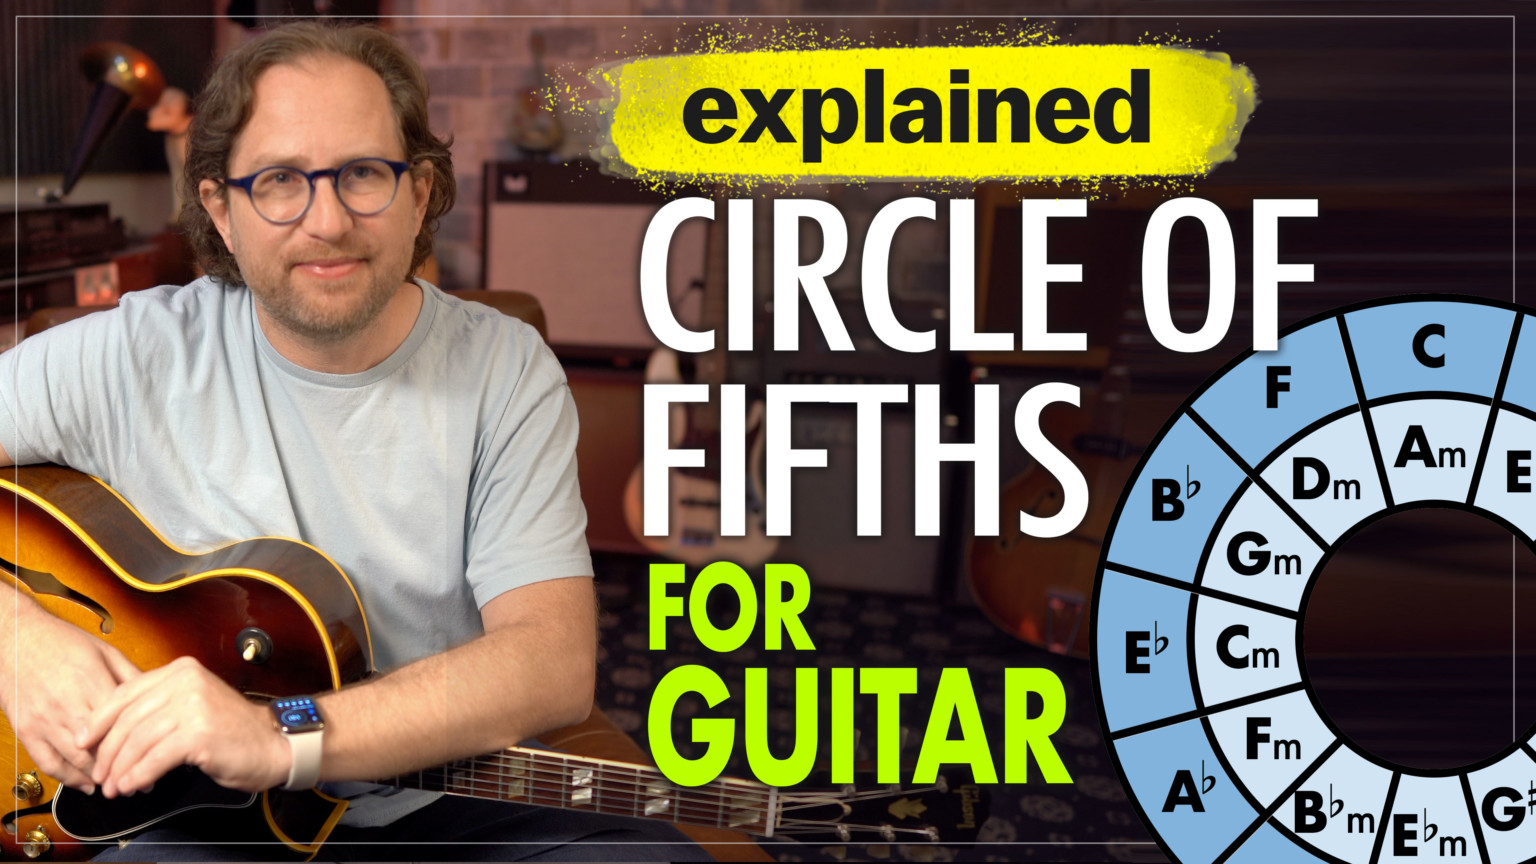 circle-of-fifths-guitar-lesson